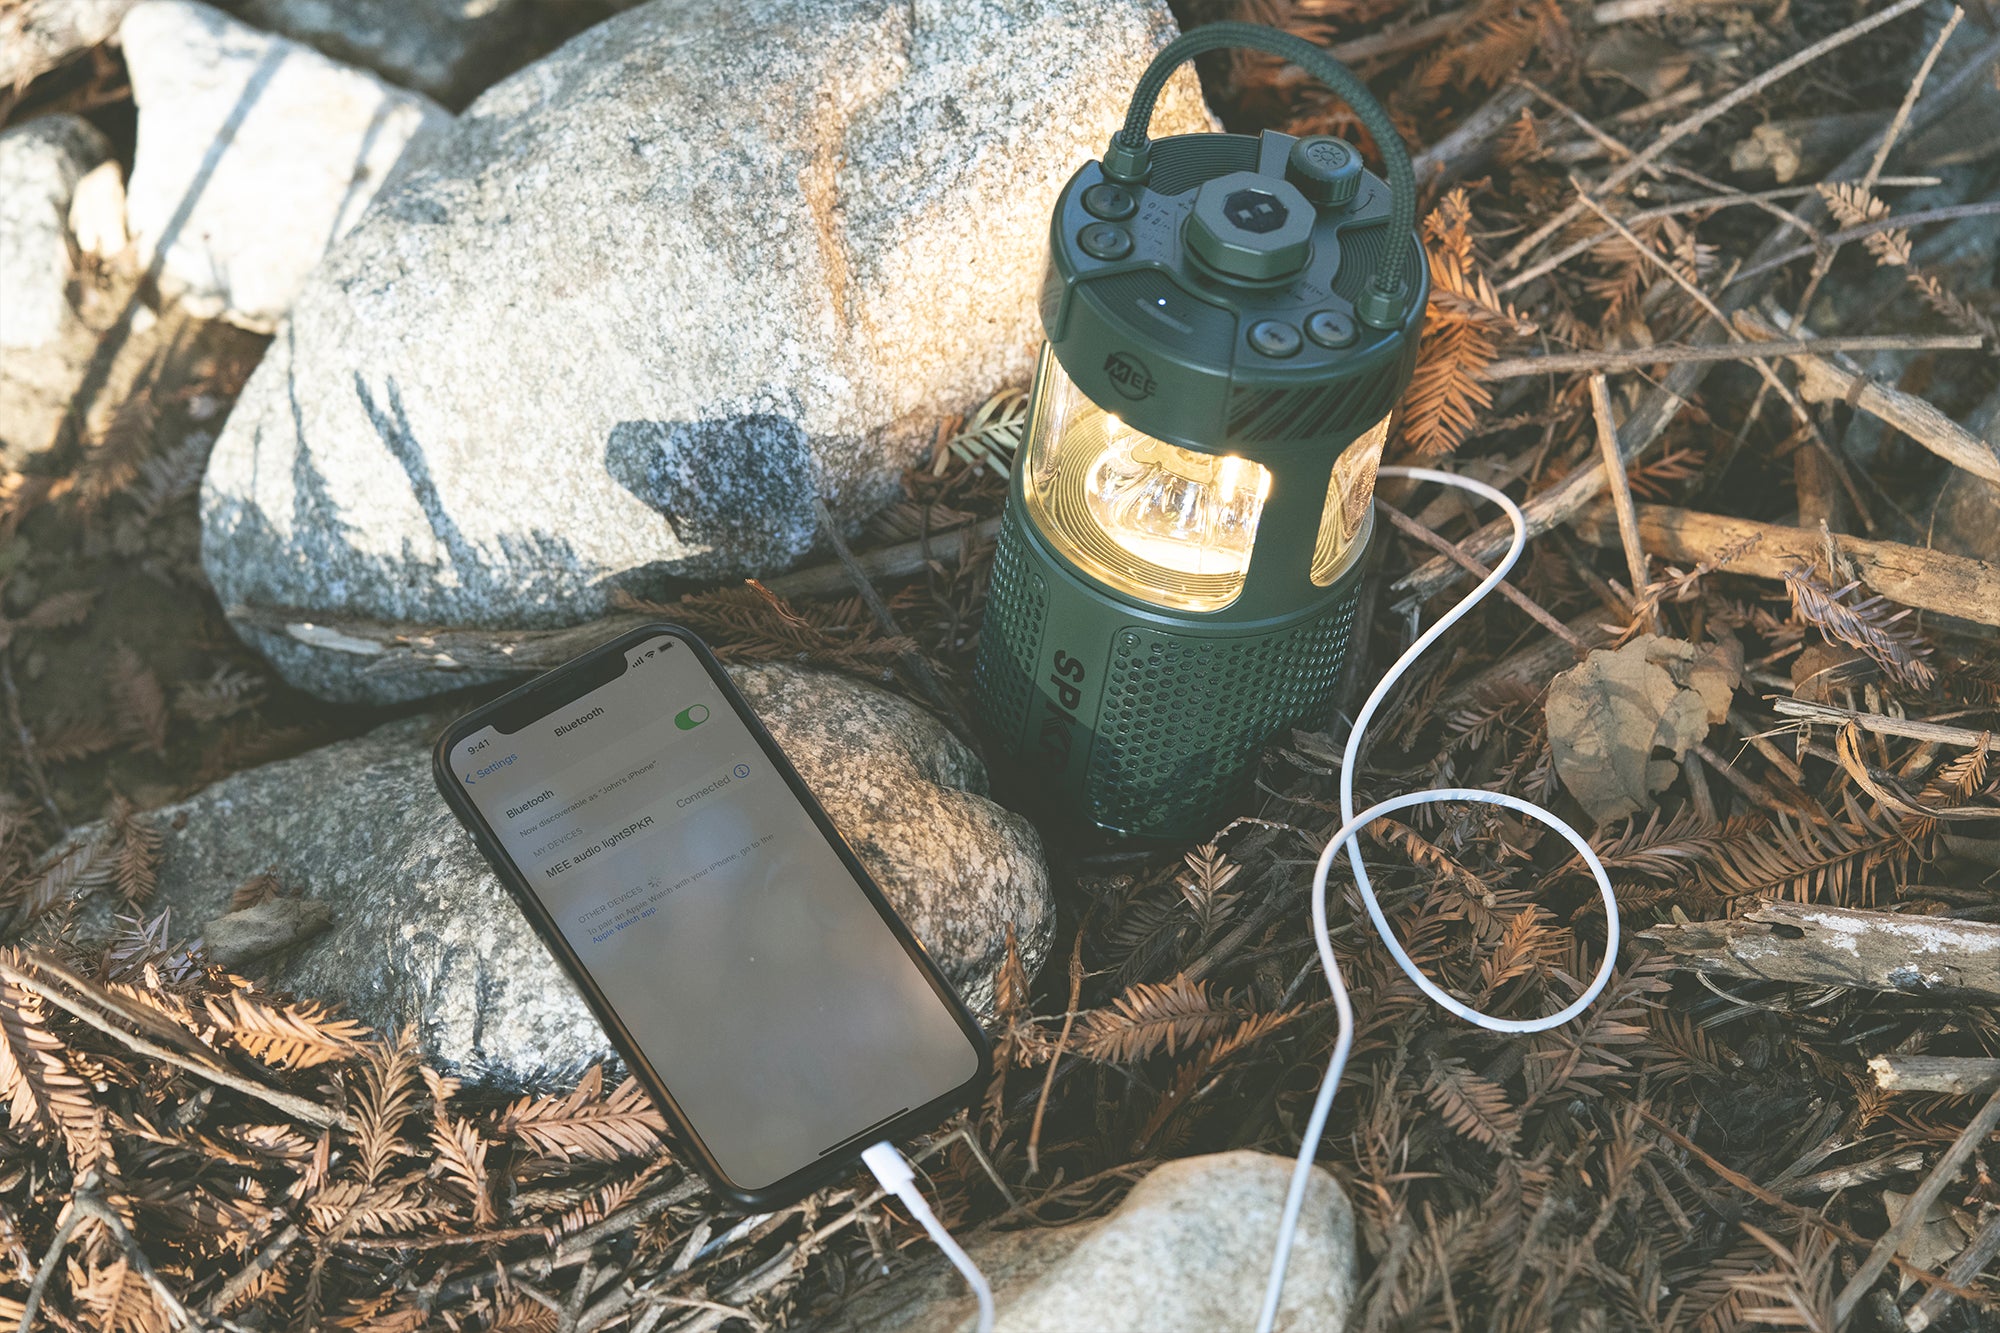 A smartphone connected via usb to a portable, green lantern on a forest floor among stones and fallen leaves, displaying an active charging screen.